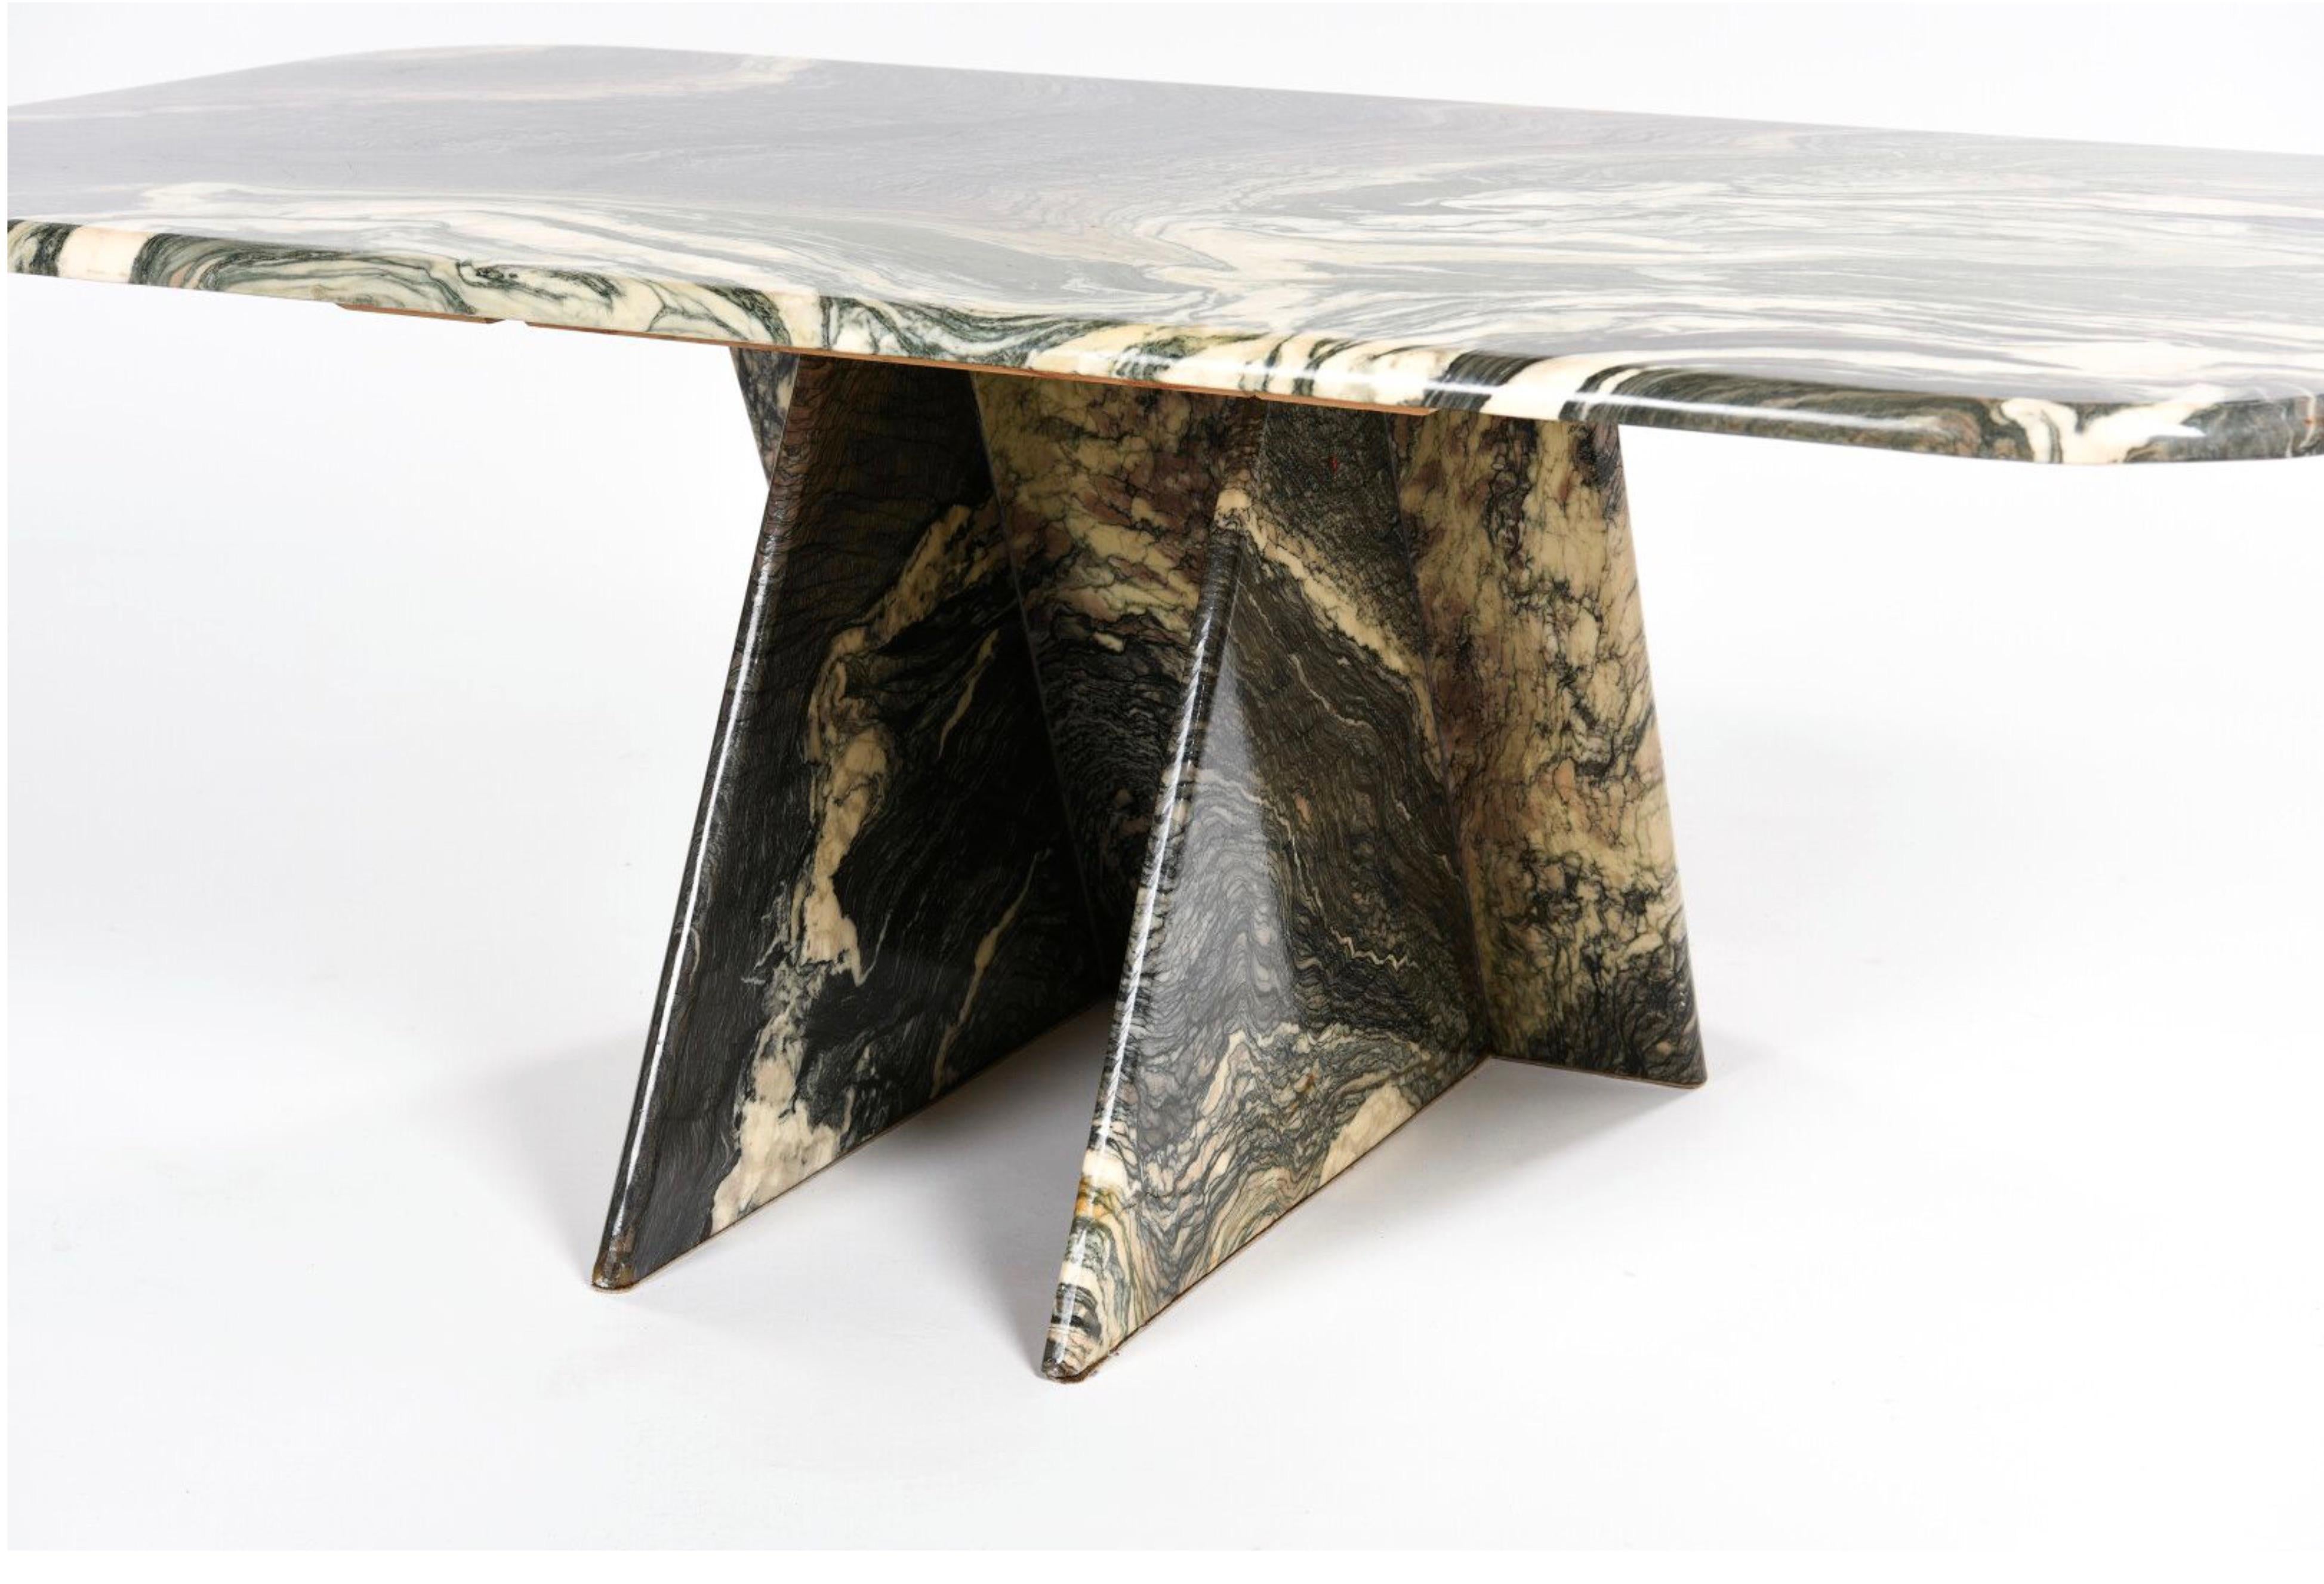 Cipollino Marble coffee table composed of a base made up of triangular sections entangled in each other and a rectangular chamfered top with rounded edges.
Circa 1970.

